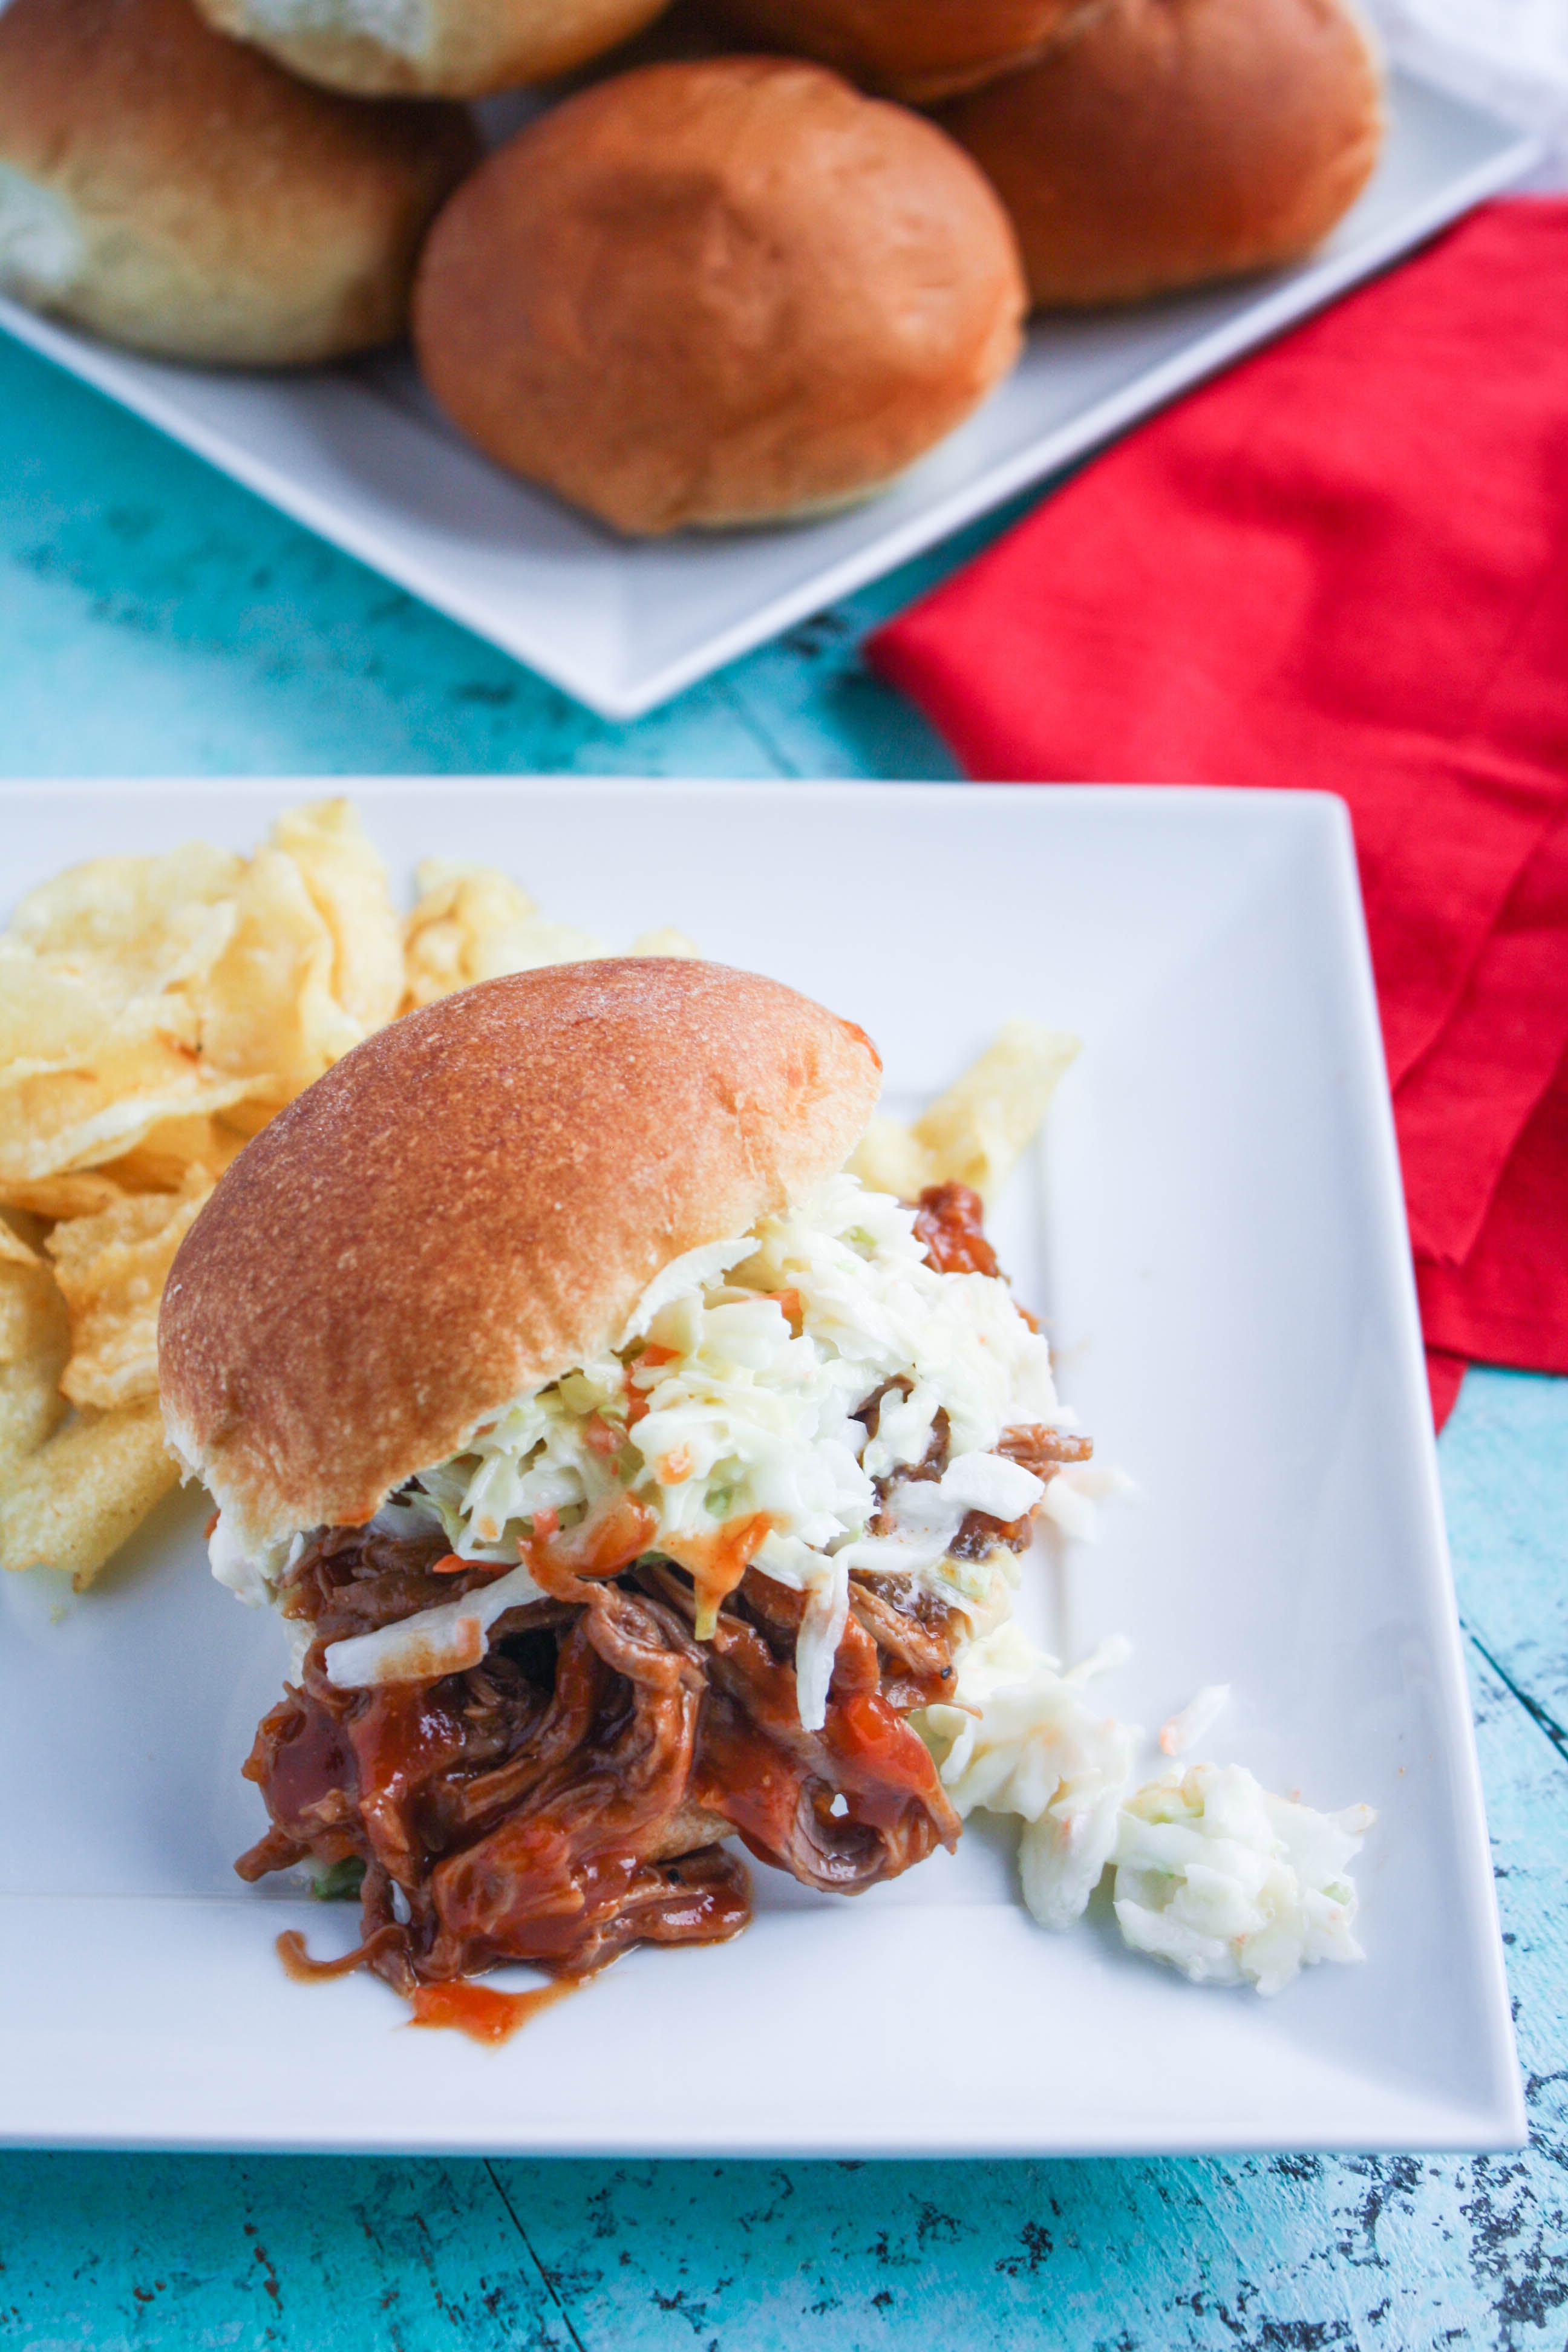 Slow Cooker BBQ Beef Sandwiches are ideal to serve at any gathering. The slow cooker keeps things fuss-free, and these sandwiches are amazing!